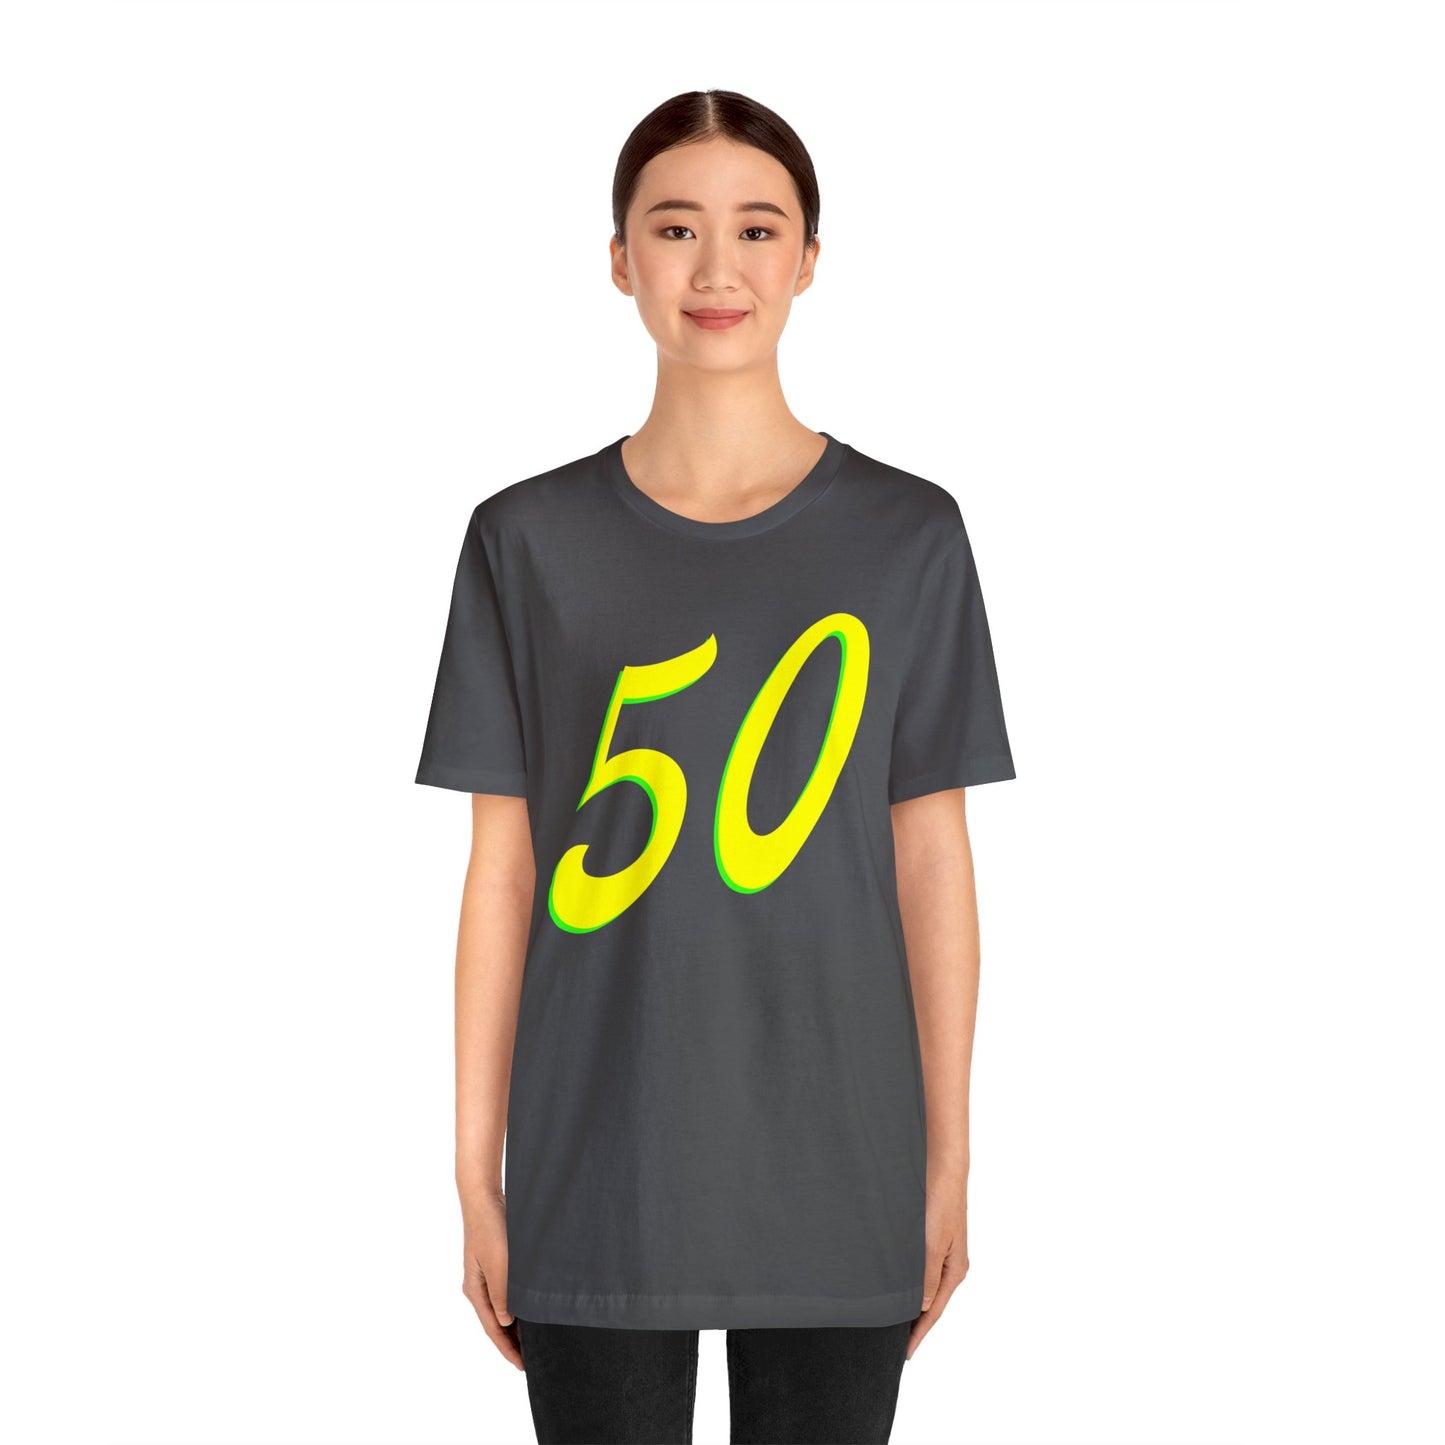 Number 50 Design - Soft Cotton Tee for birthdays and celebrations, Gift for friends and family, Multiple Options by clothezy.com in Black Size Medium - Buy Now